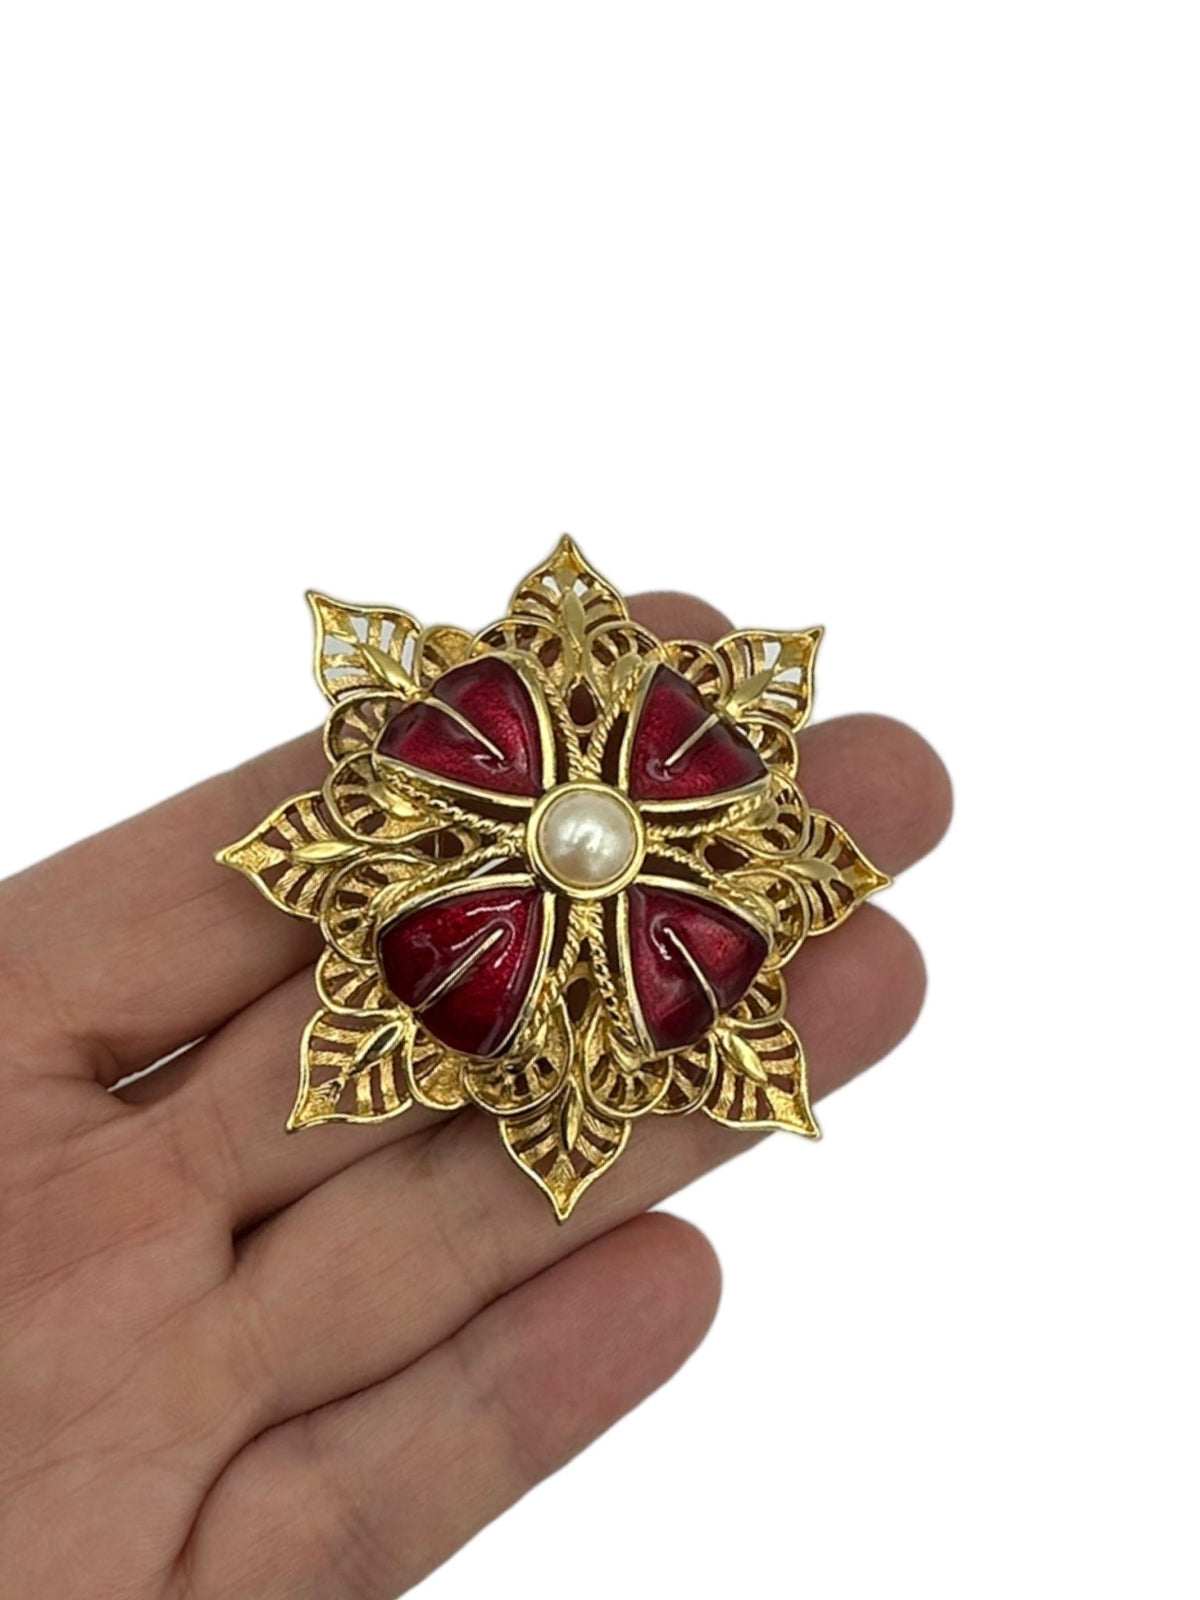 Monet Gold Layered Red Enamel & Pearl Flower Vintage Brooch - 24 Wishes Vintage Jewelry